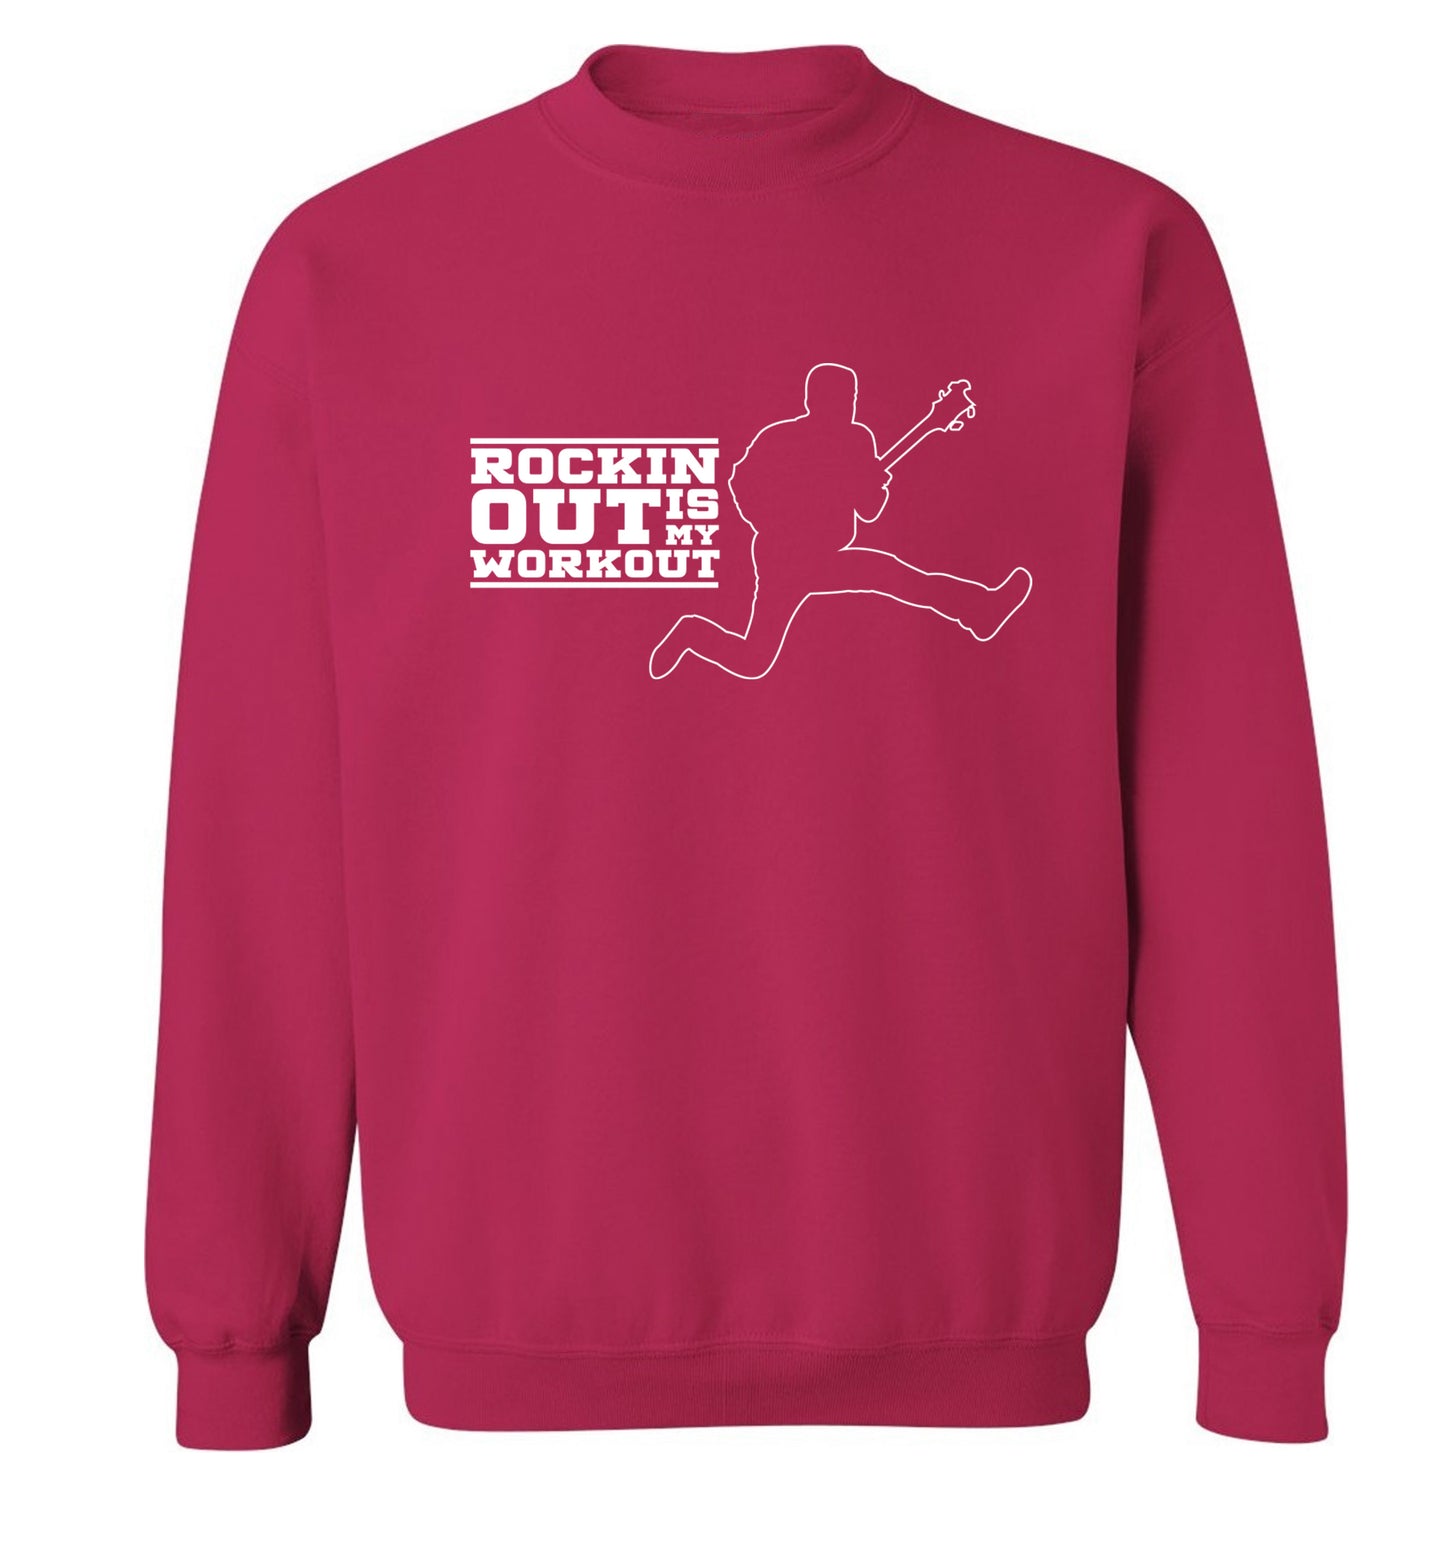 Rockin out is my workout Adult's unisex pink Sweater 2XL